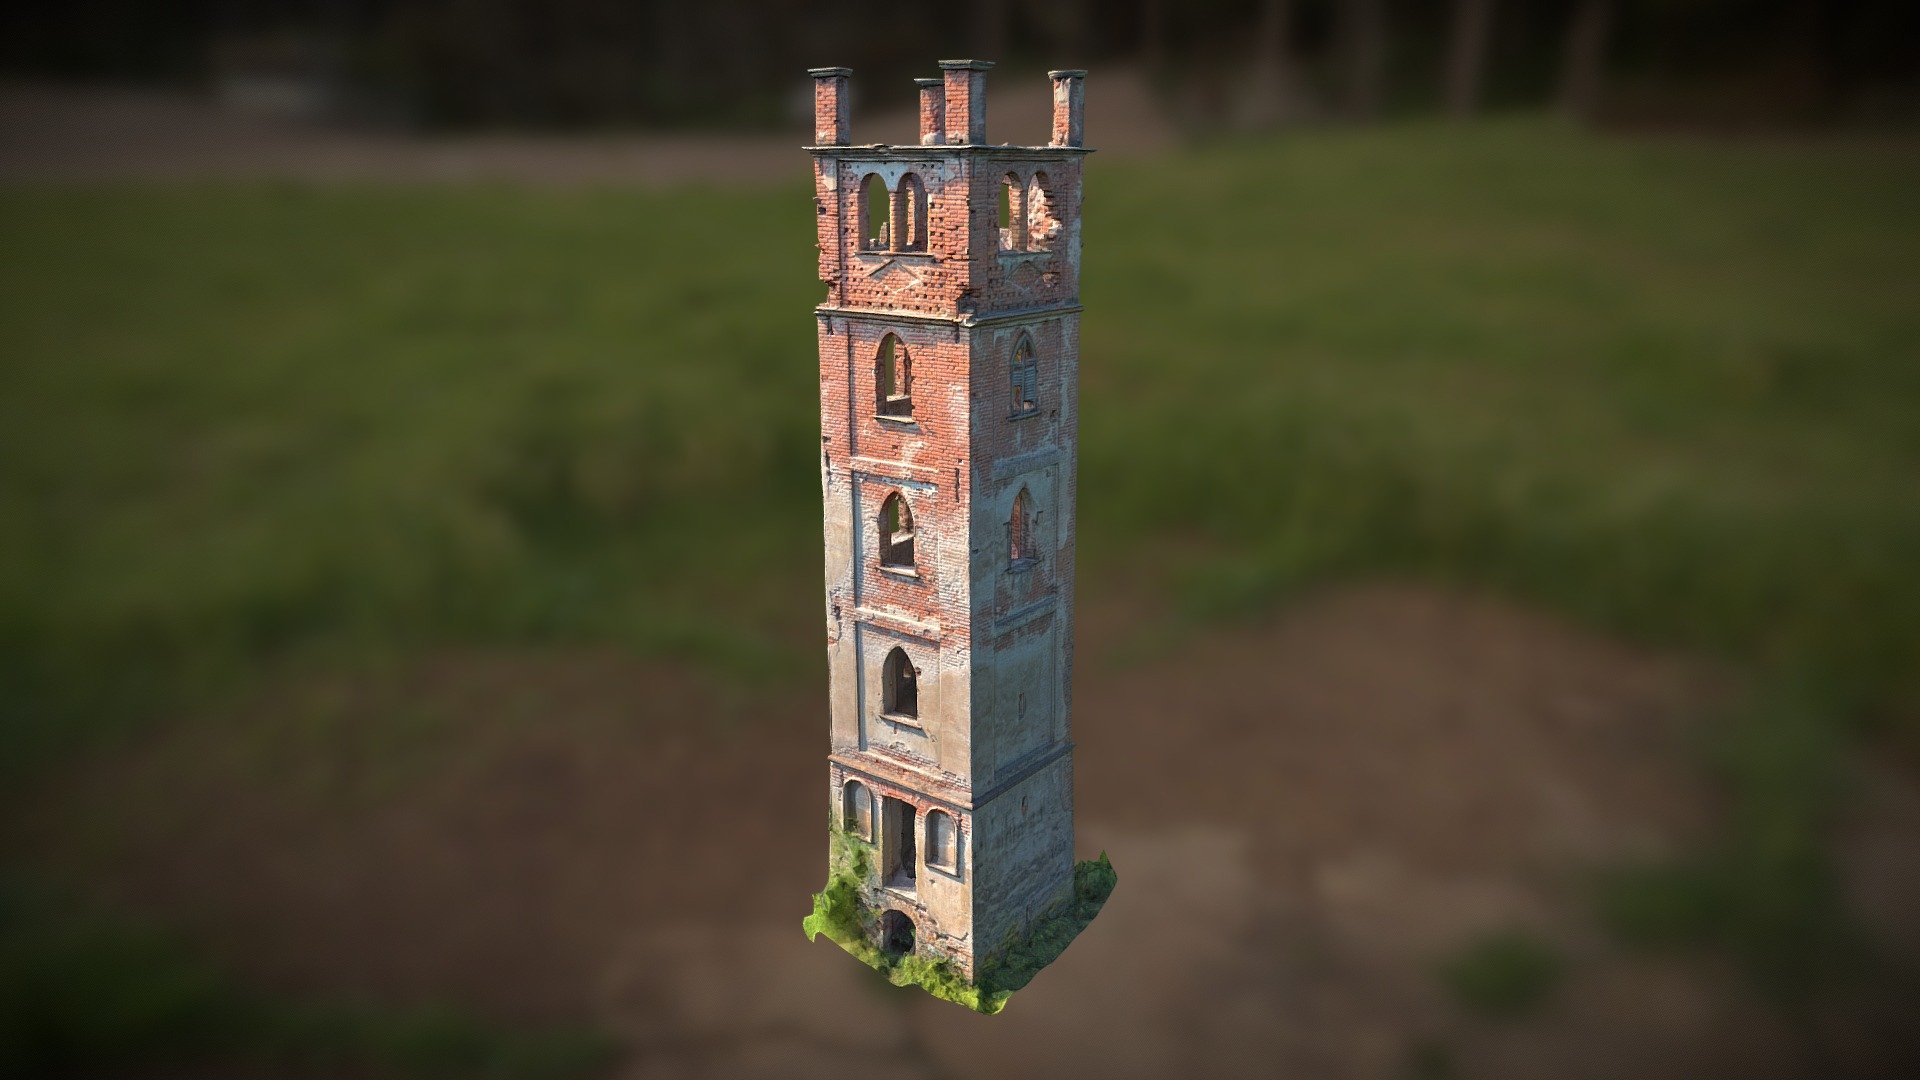 Tower in Roasio (VC), Piedmont, Italy

Created in RealityCapture by Capturing Reality from 492 images in 00h:04m:48s 3d model